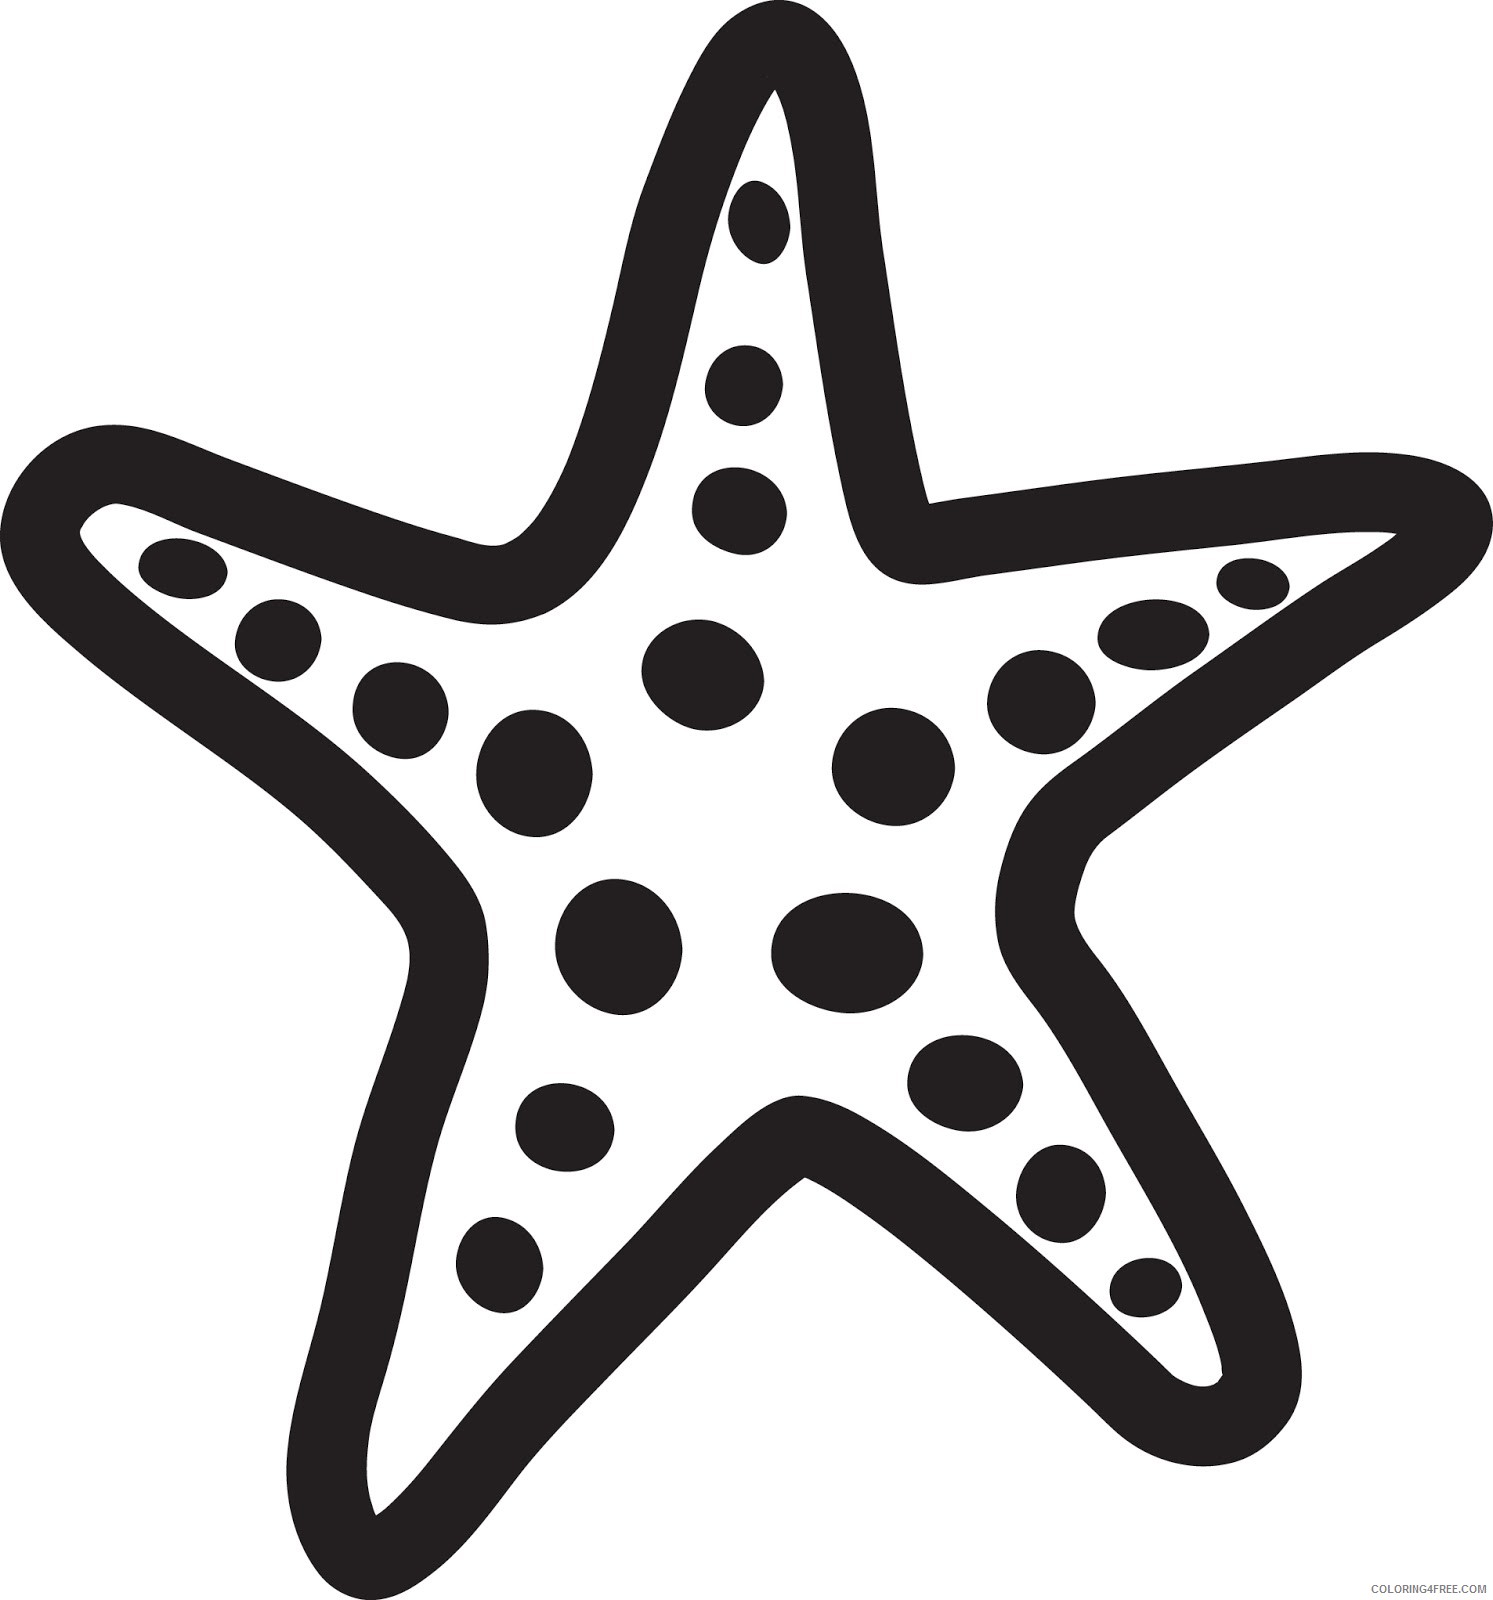 starfish-outline-coloring-pages-starfish-jpg-58747c121dc28-jpg-printable-coloring4free